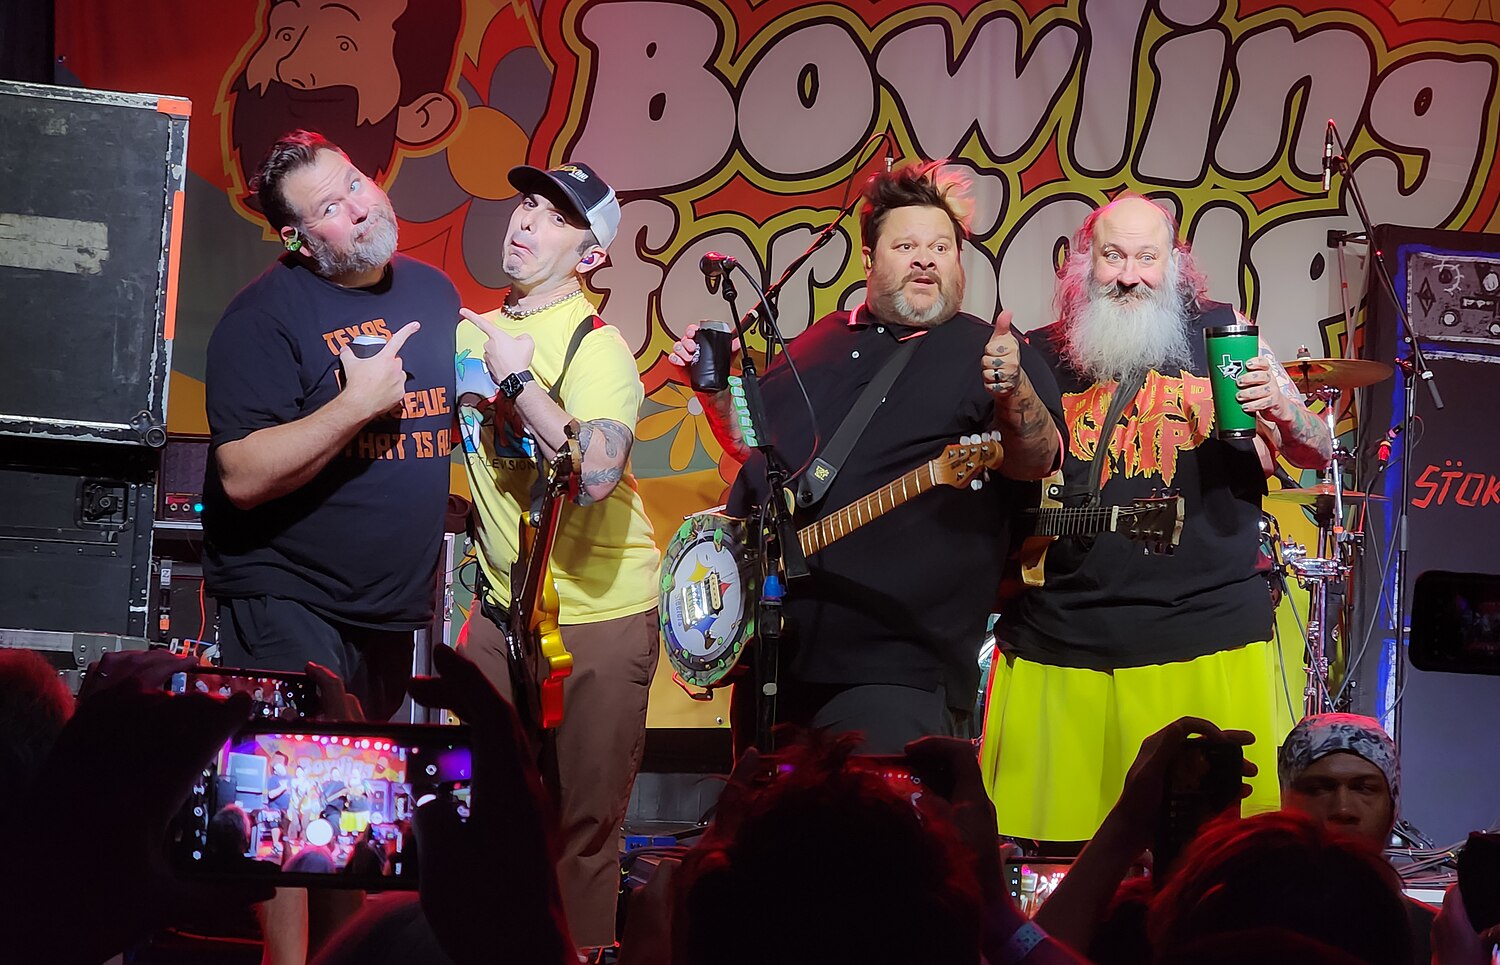 Facts about Bowling for Soup